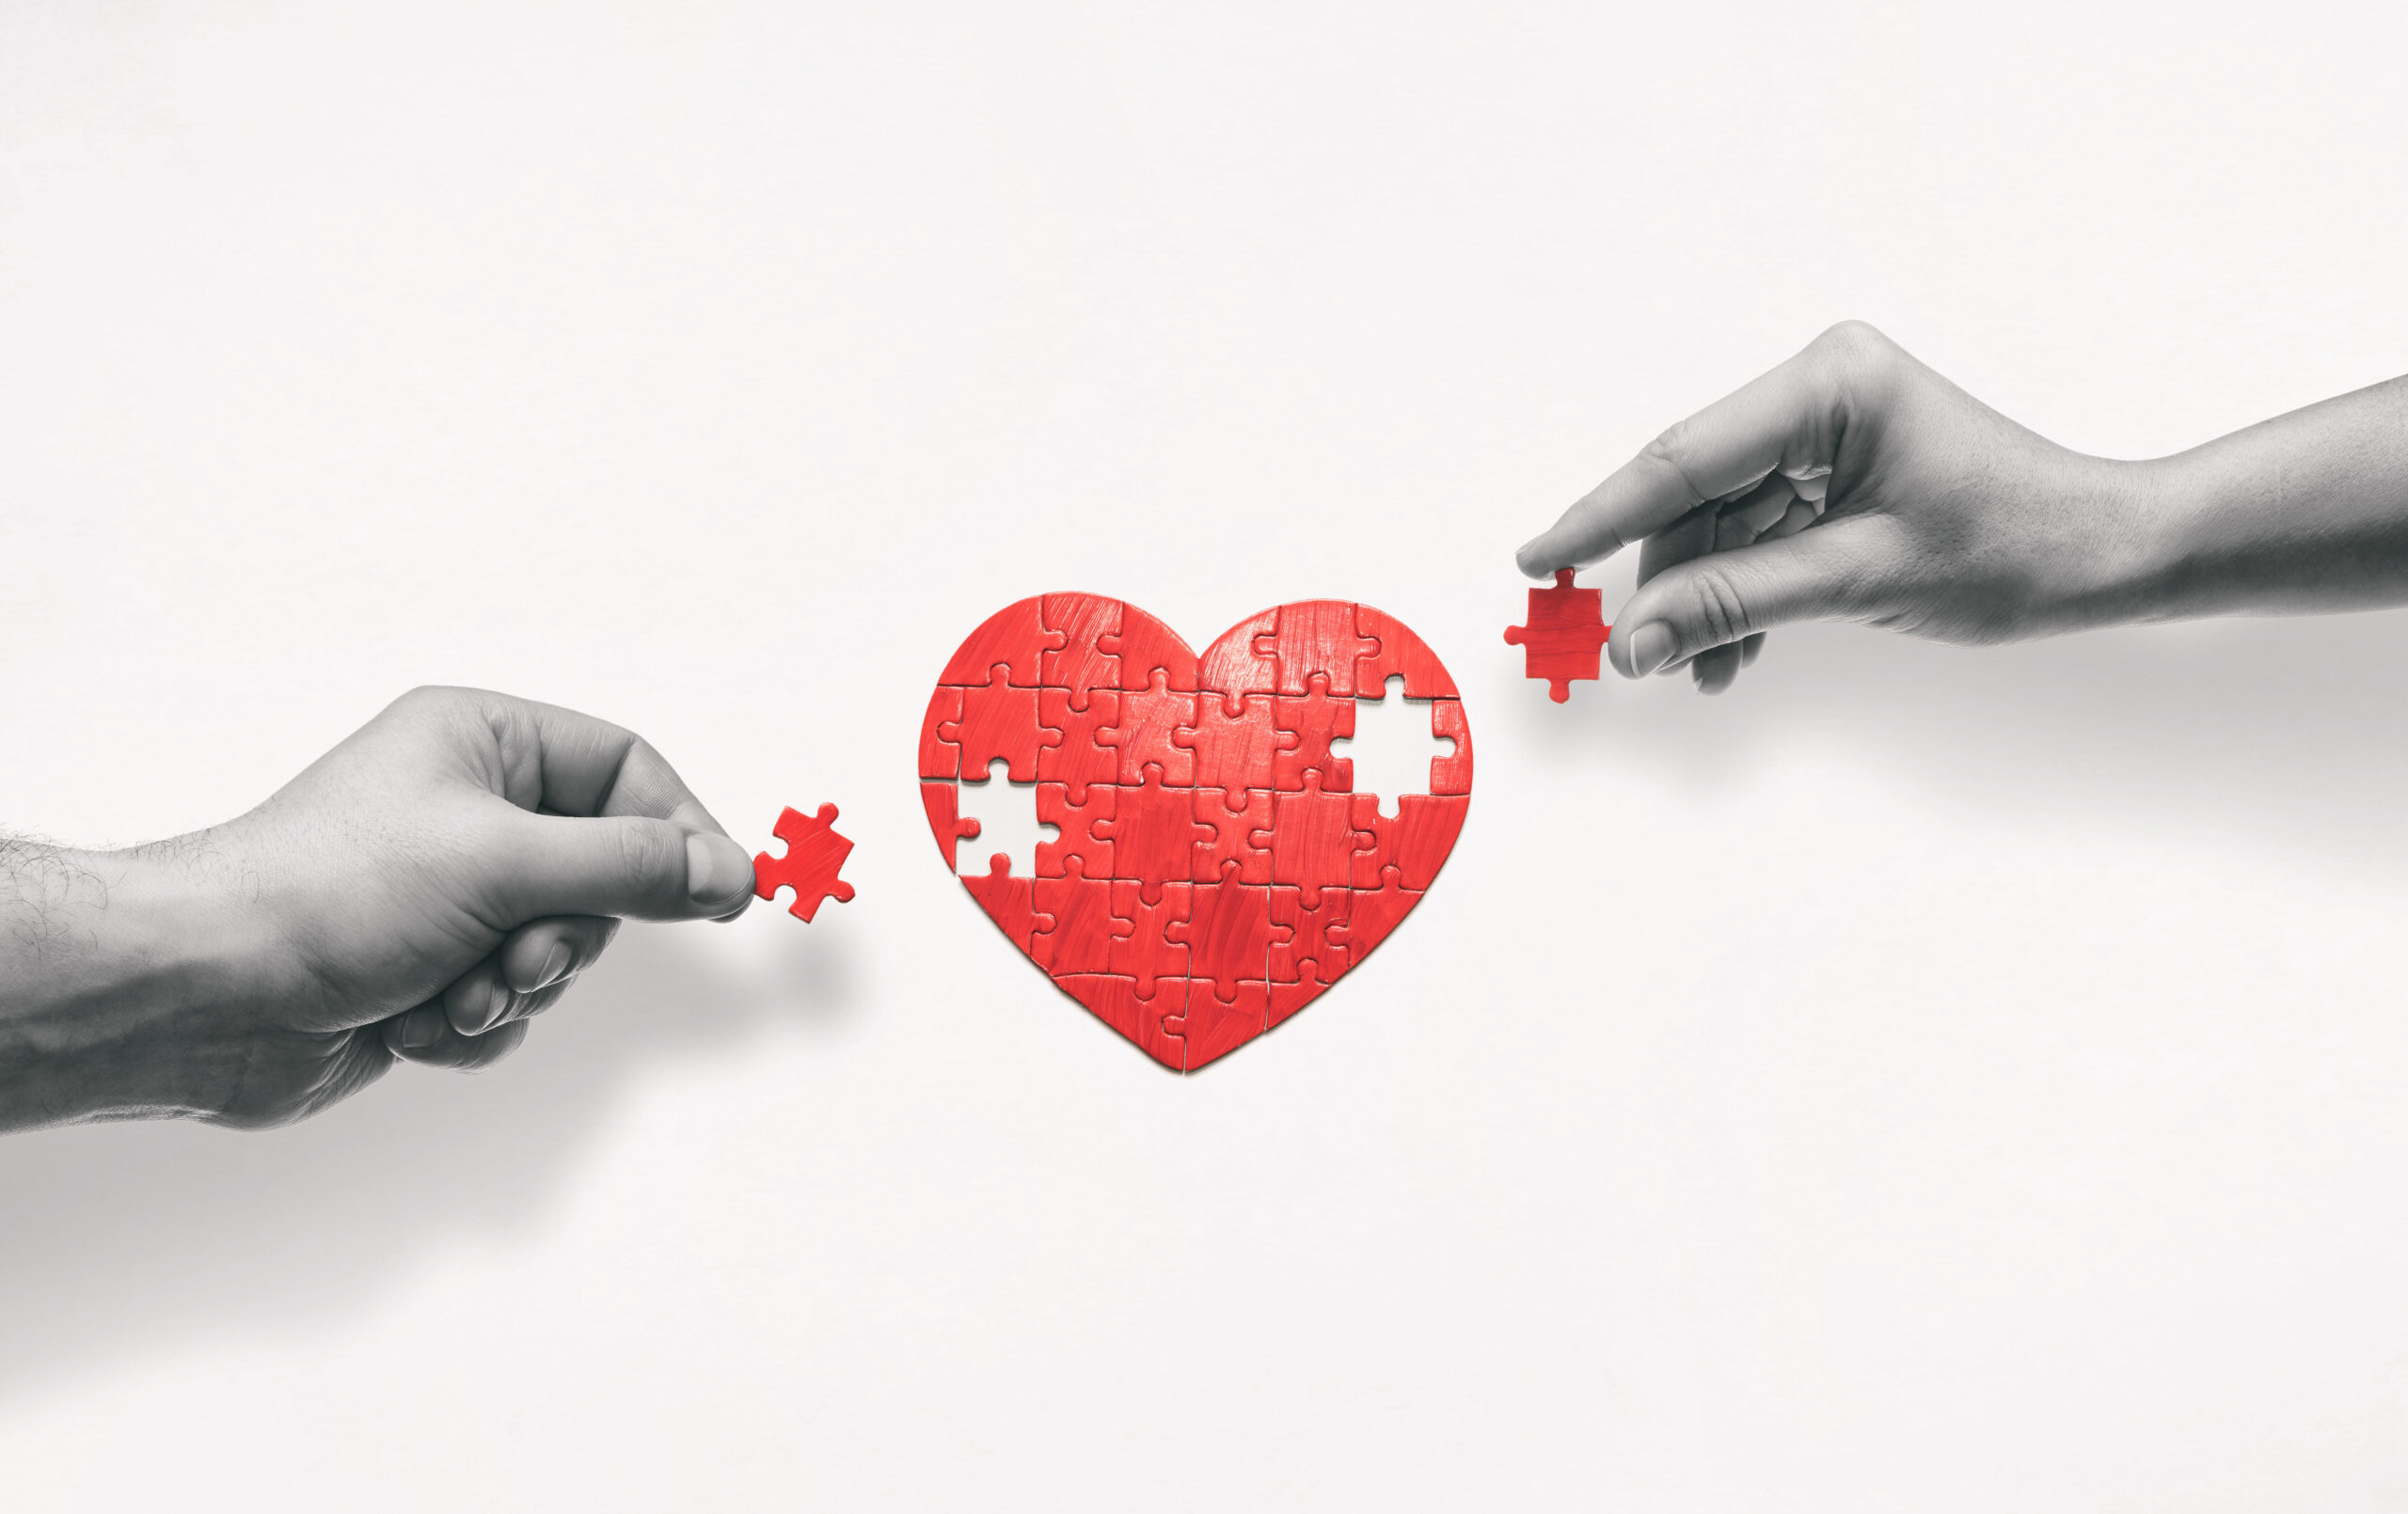 Two hands shown putting together a heart shaped jigsaw puzzle